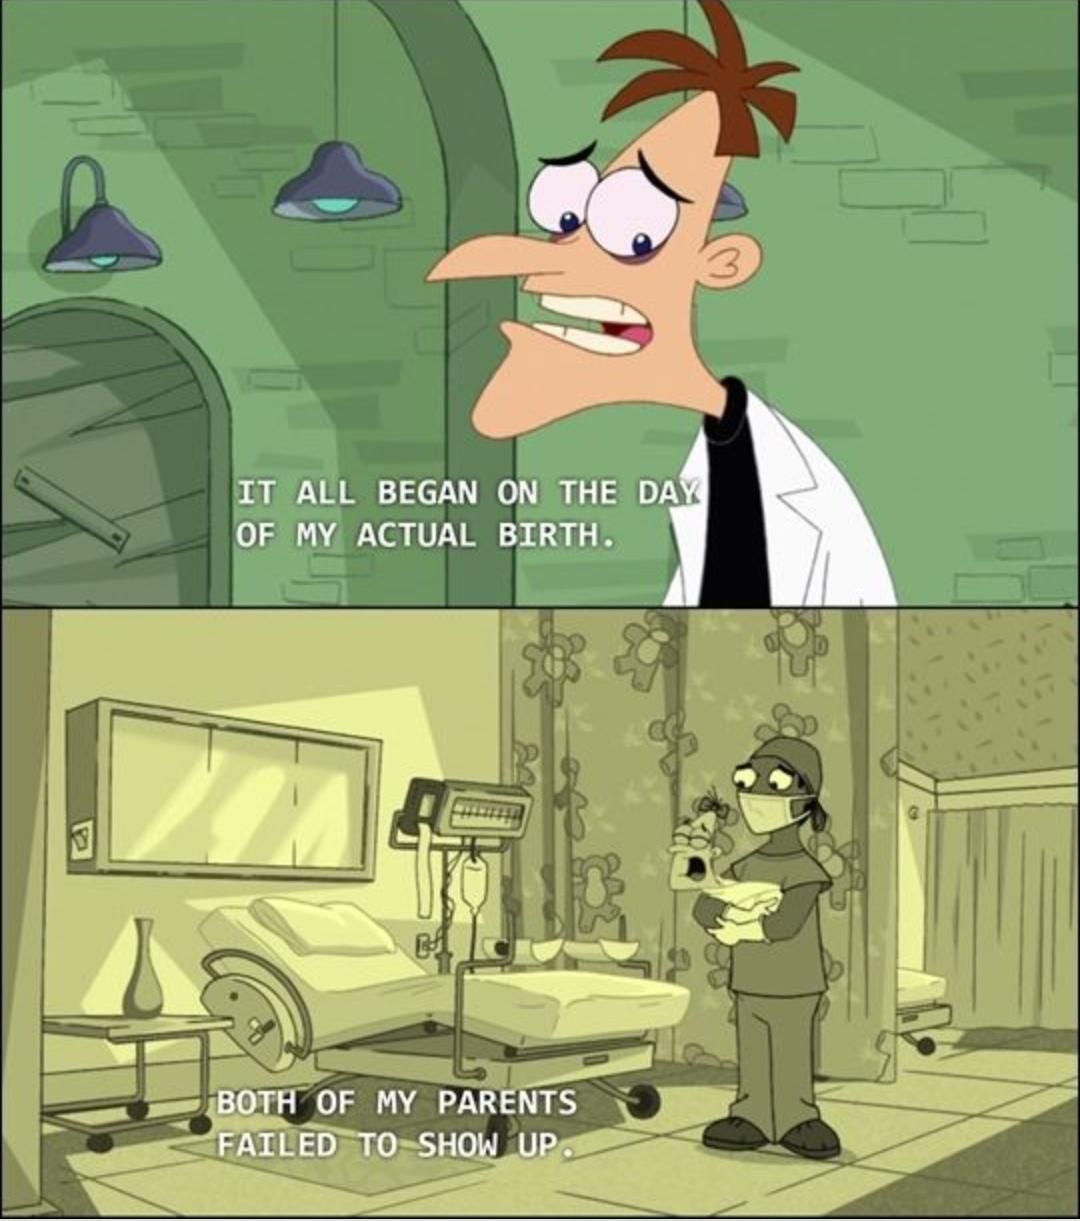 If you ever feel sad, just remember none of the Doofenshmirtz's parents showed up for his birth.